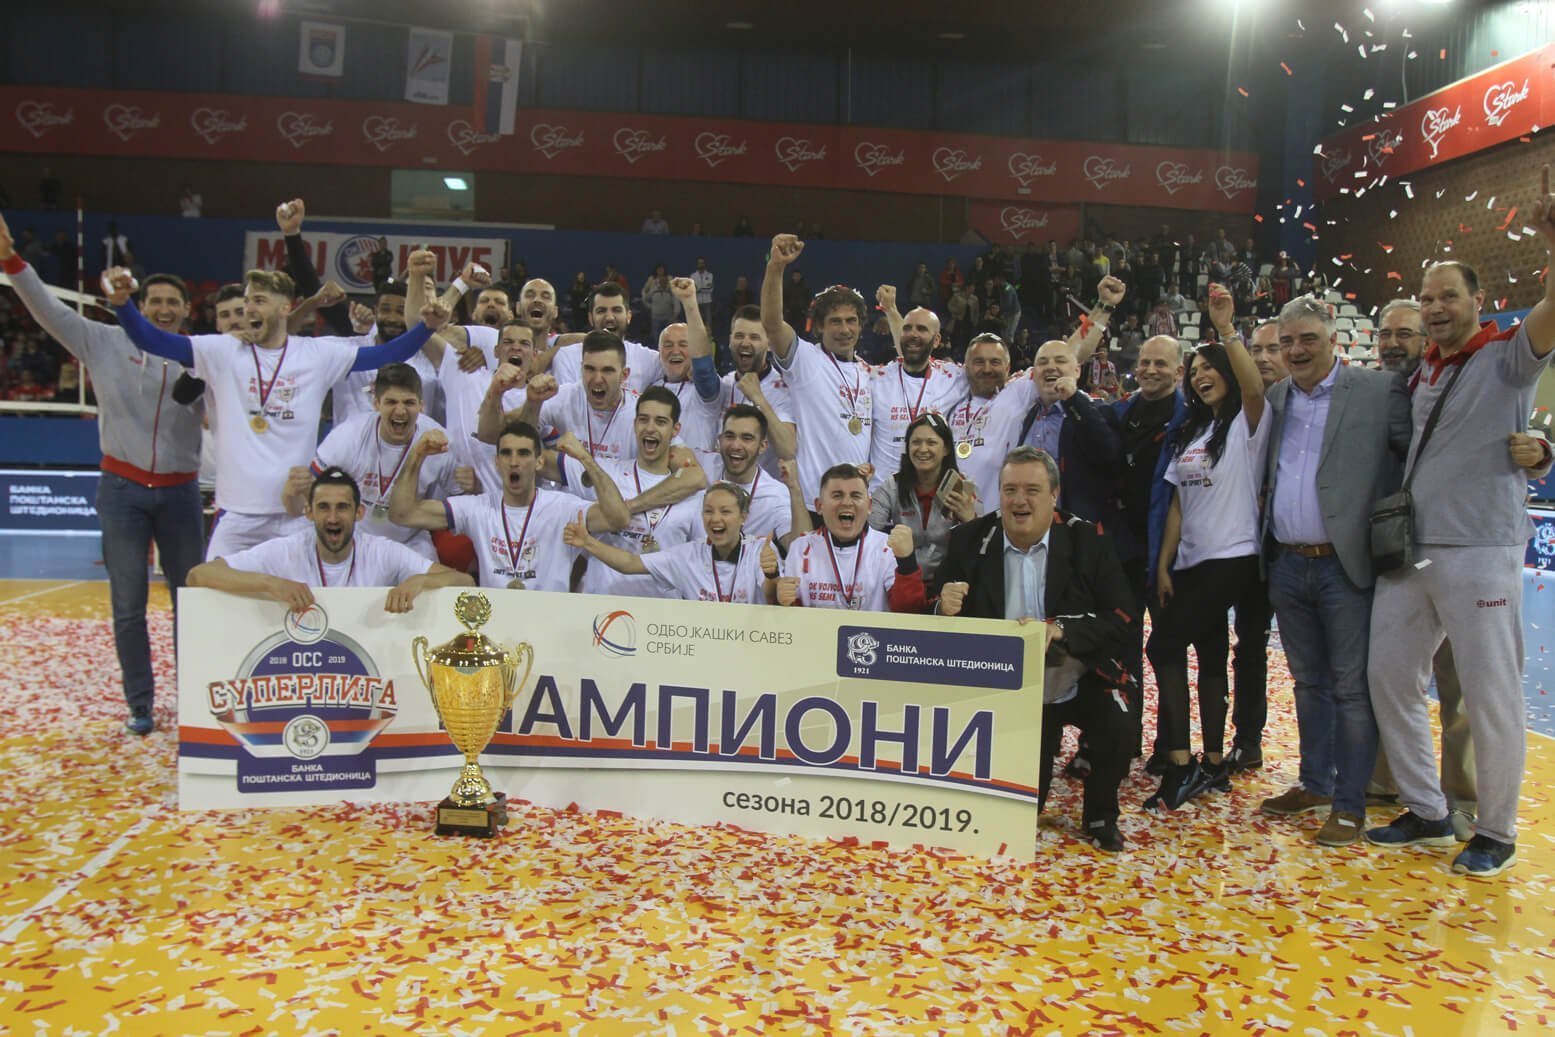 “Vojvodina” volleyball team for the third time in a row is the country champion